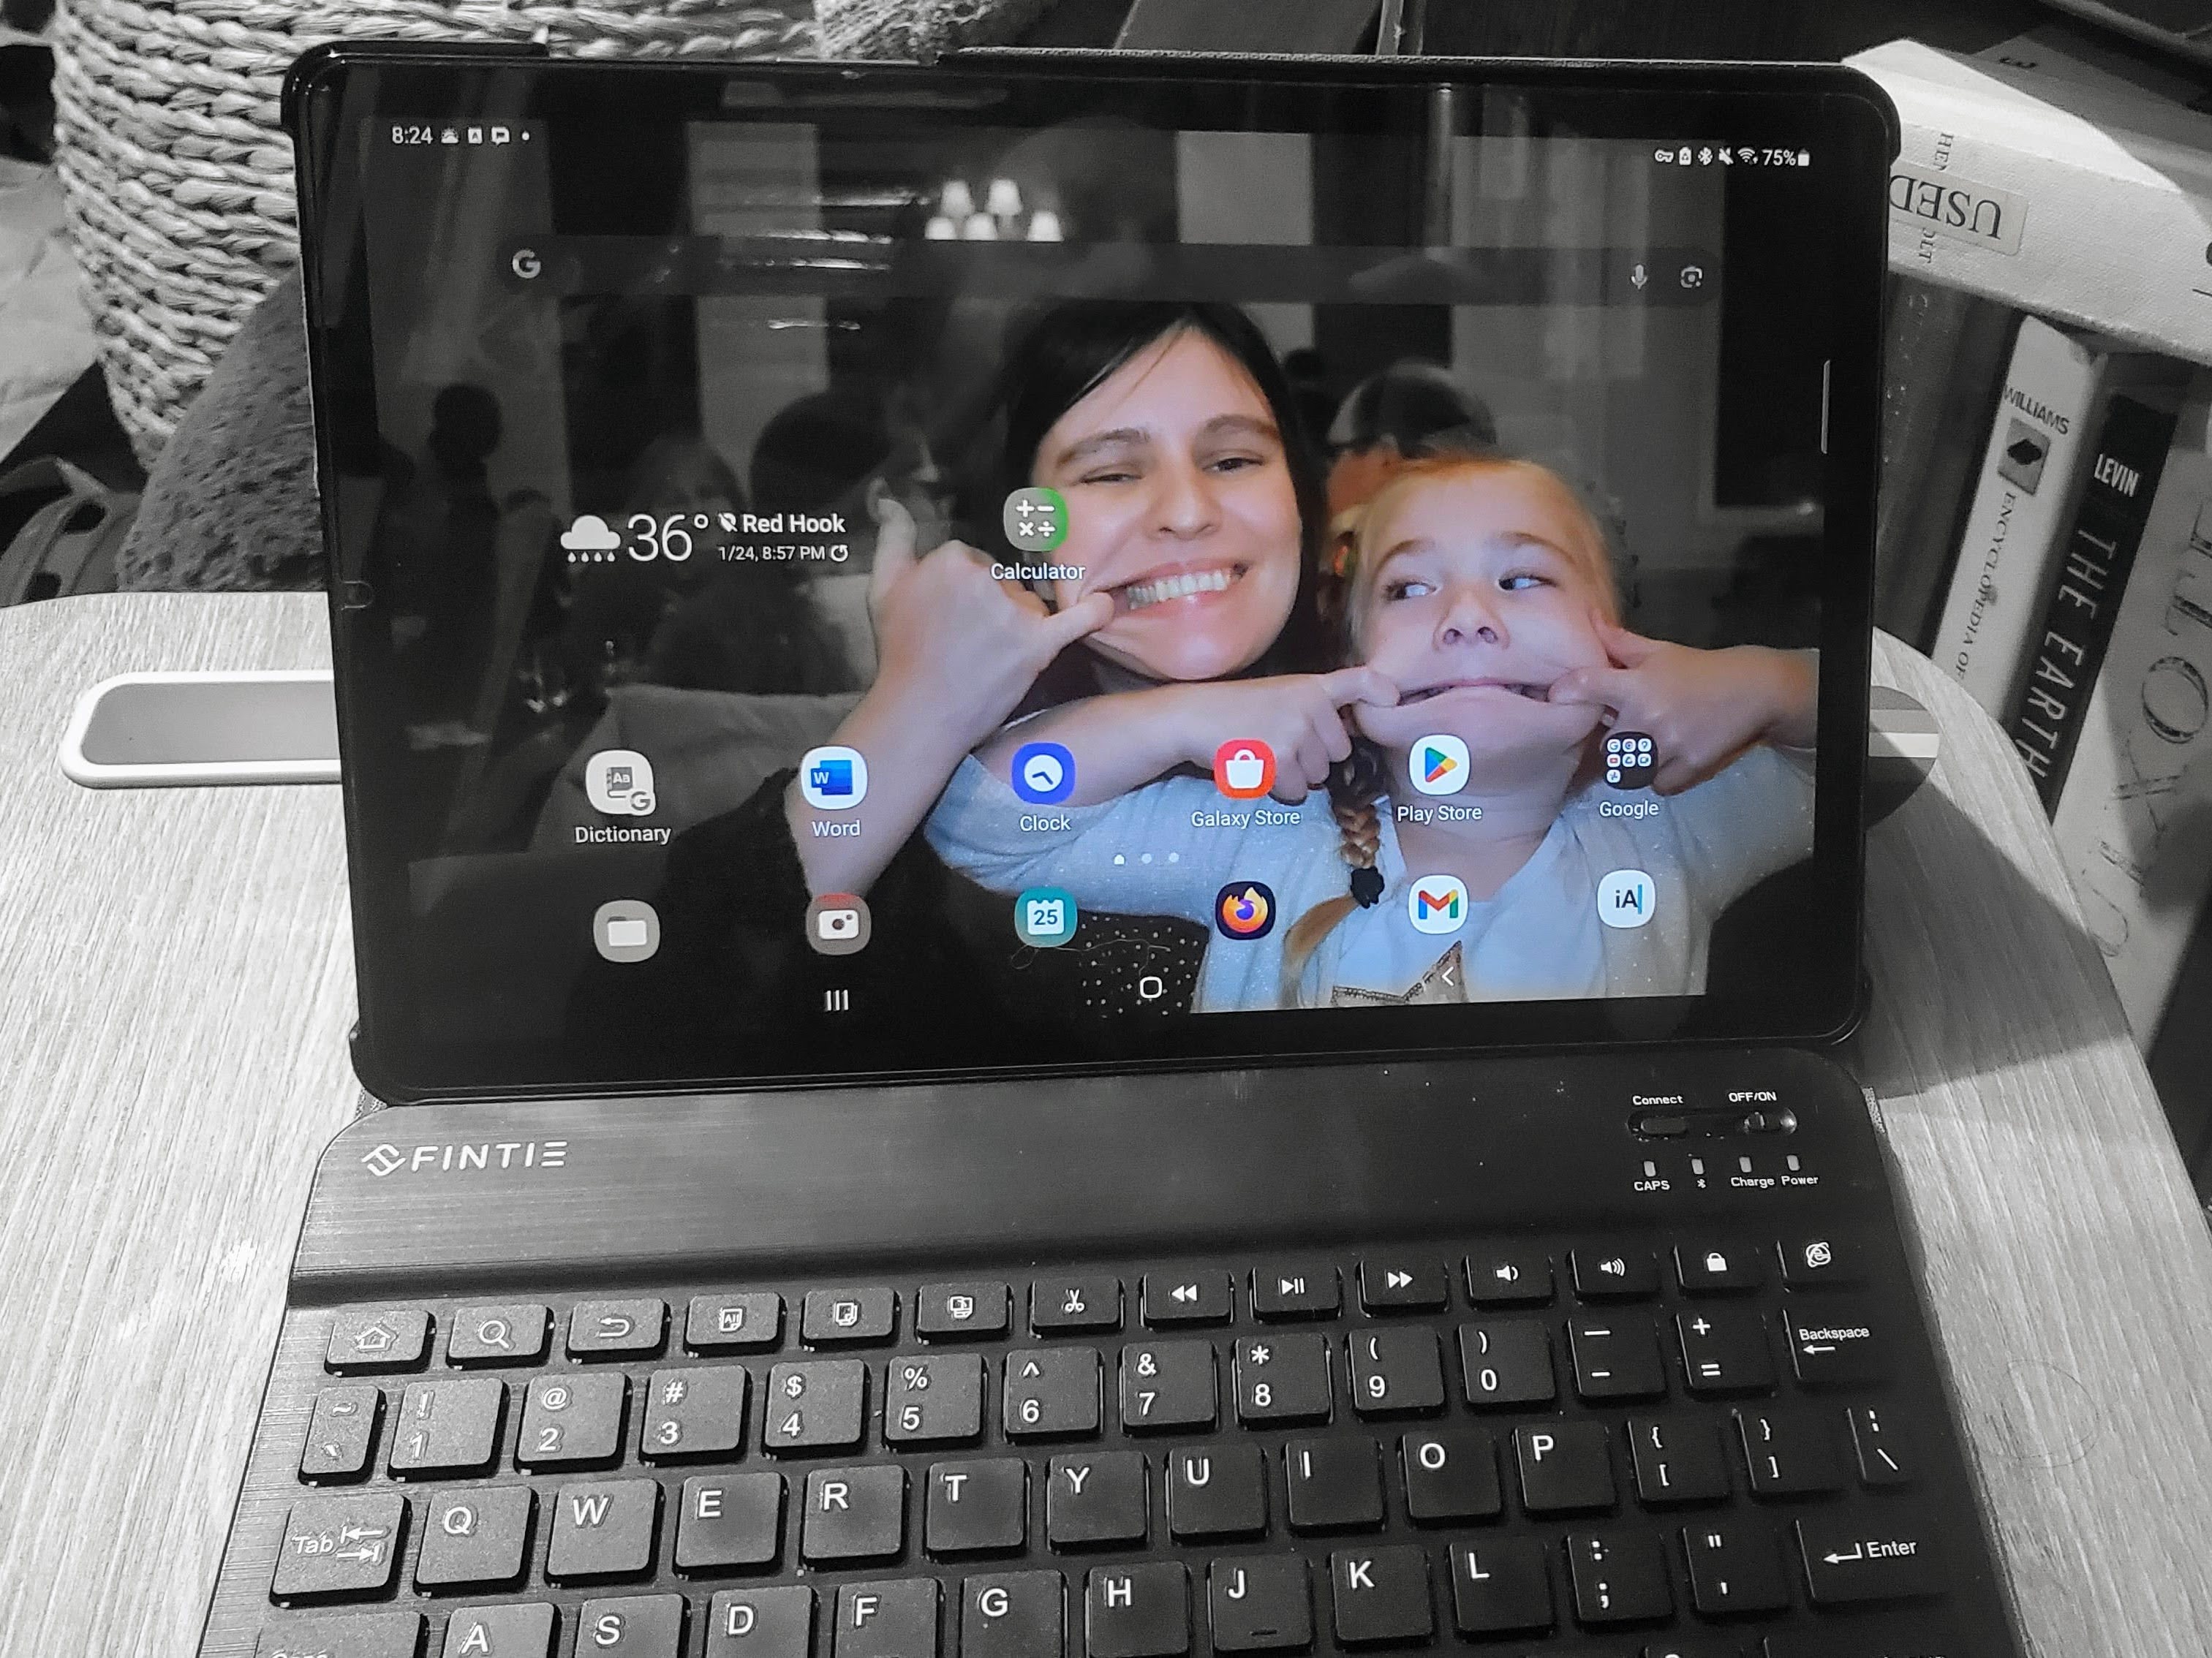 A Galaxy tablet with a picture of an adult and child making silly faces